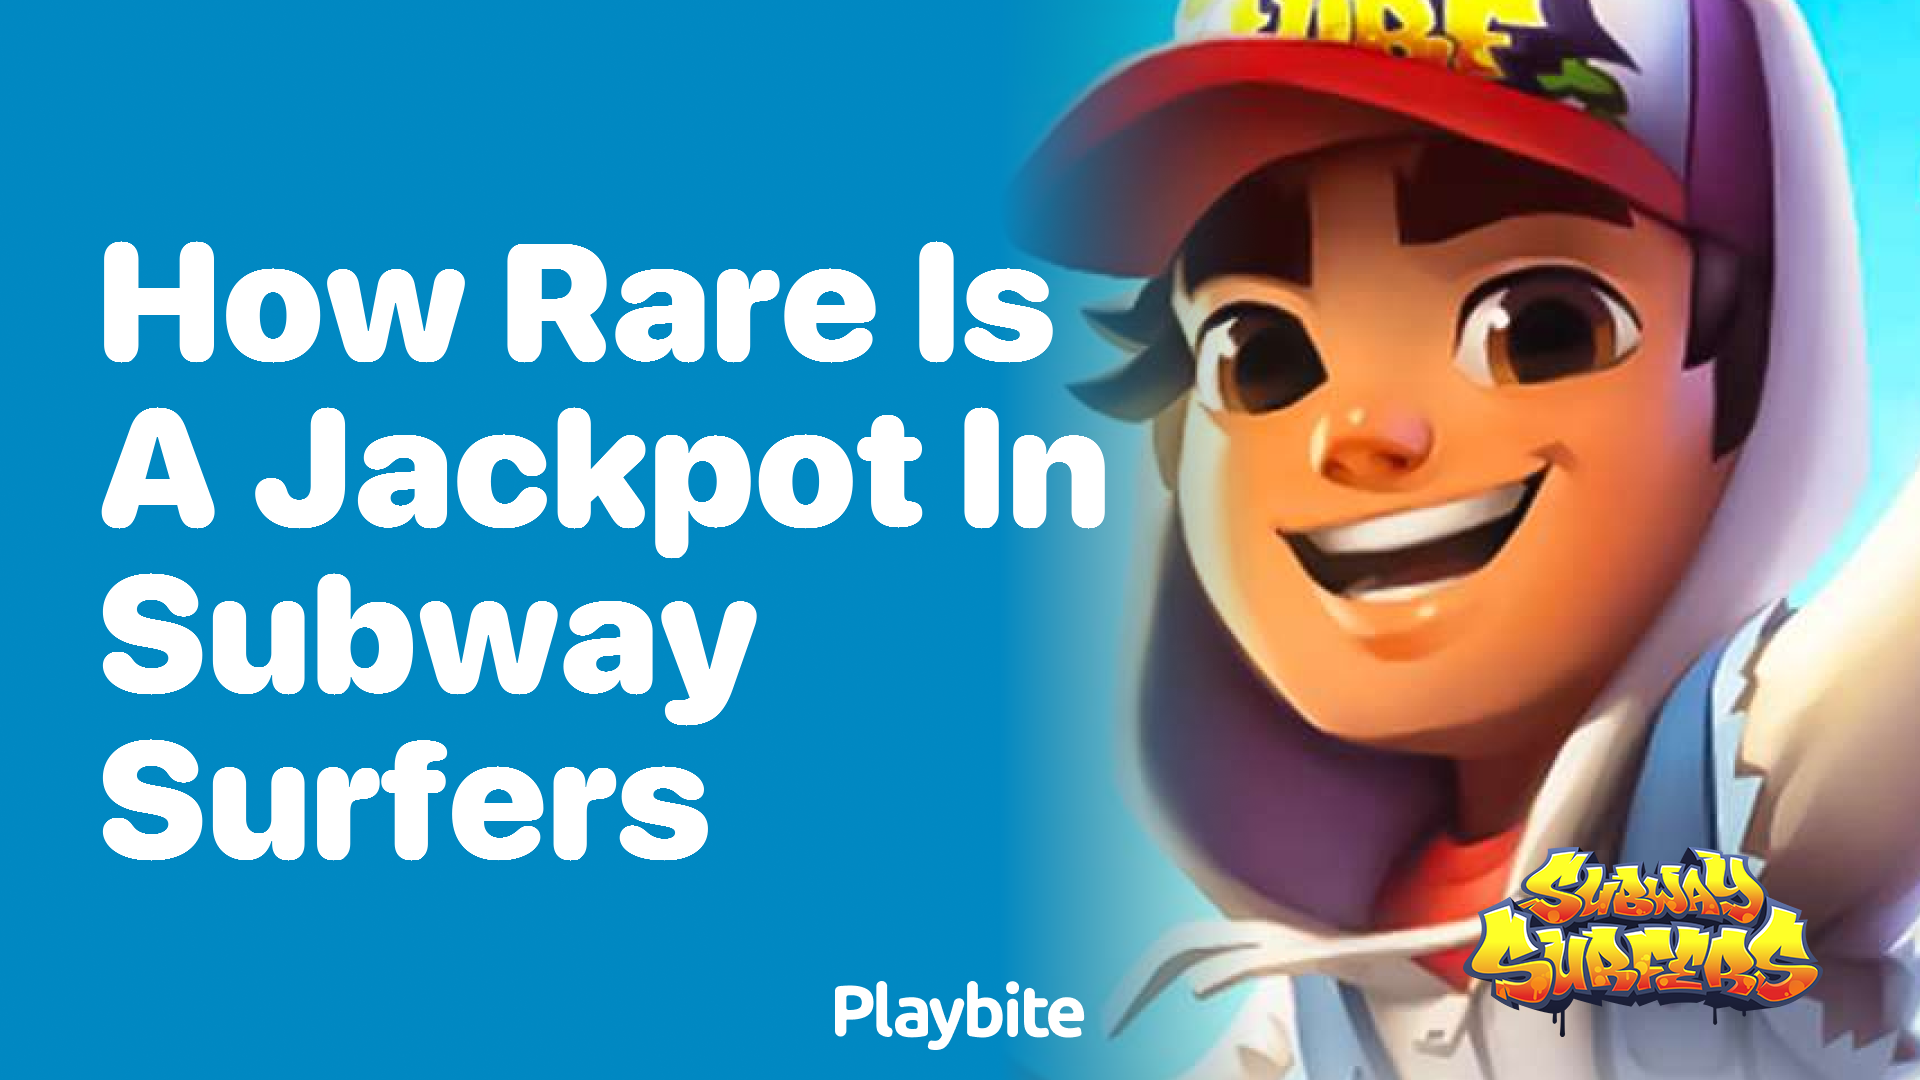 How Rare Is a Jackpot in Subway Surfers?